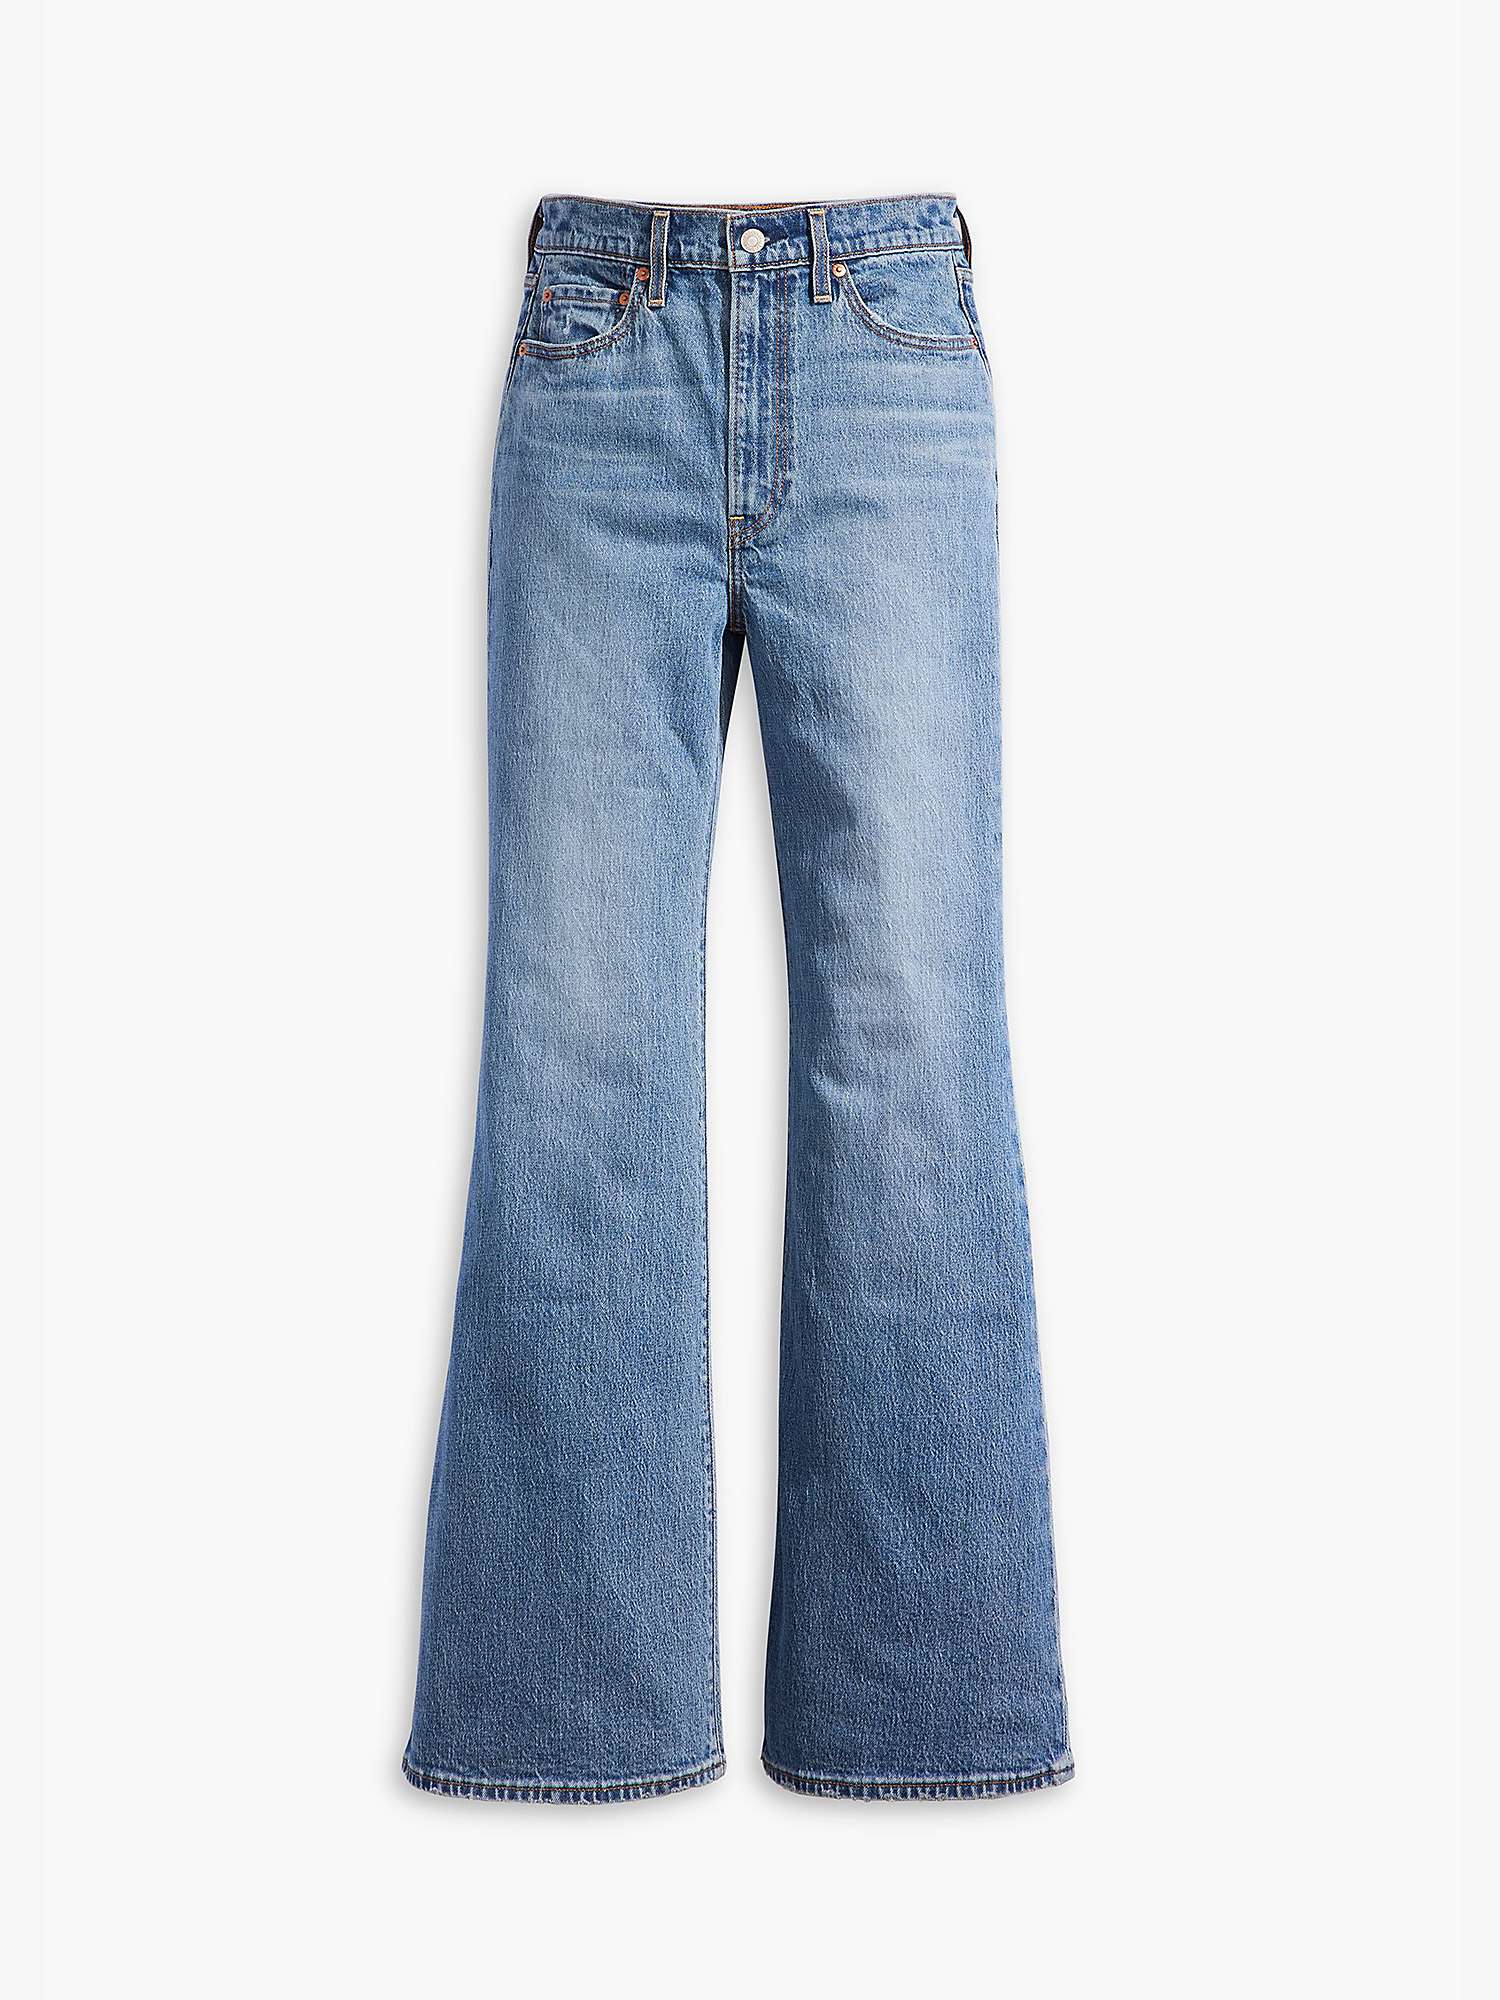 Buy Levi's Ribcage Bell Flared Leg Jeans Online at johnlewis.com